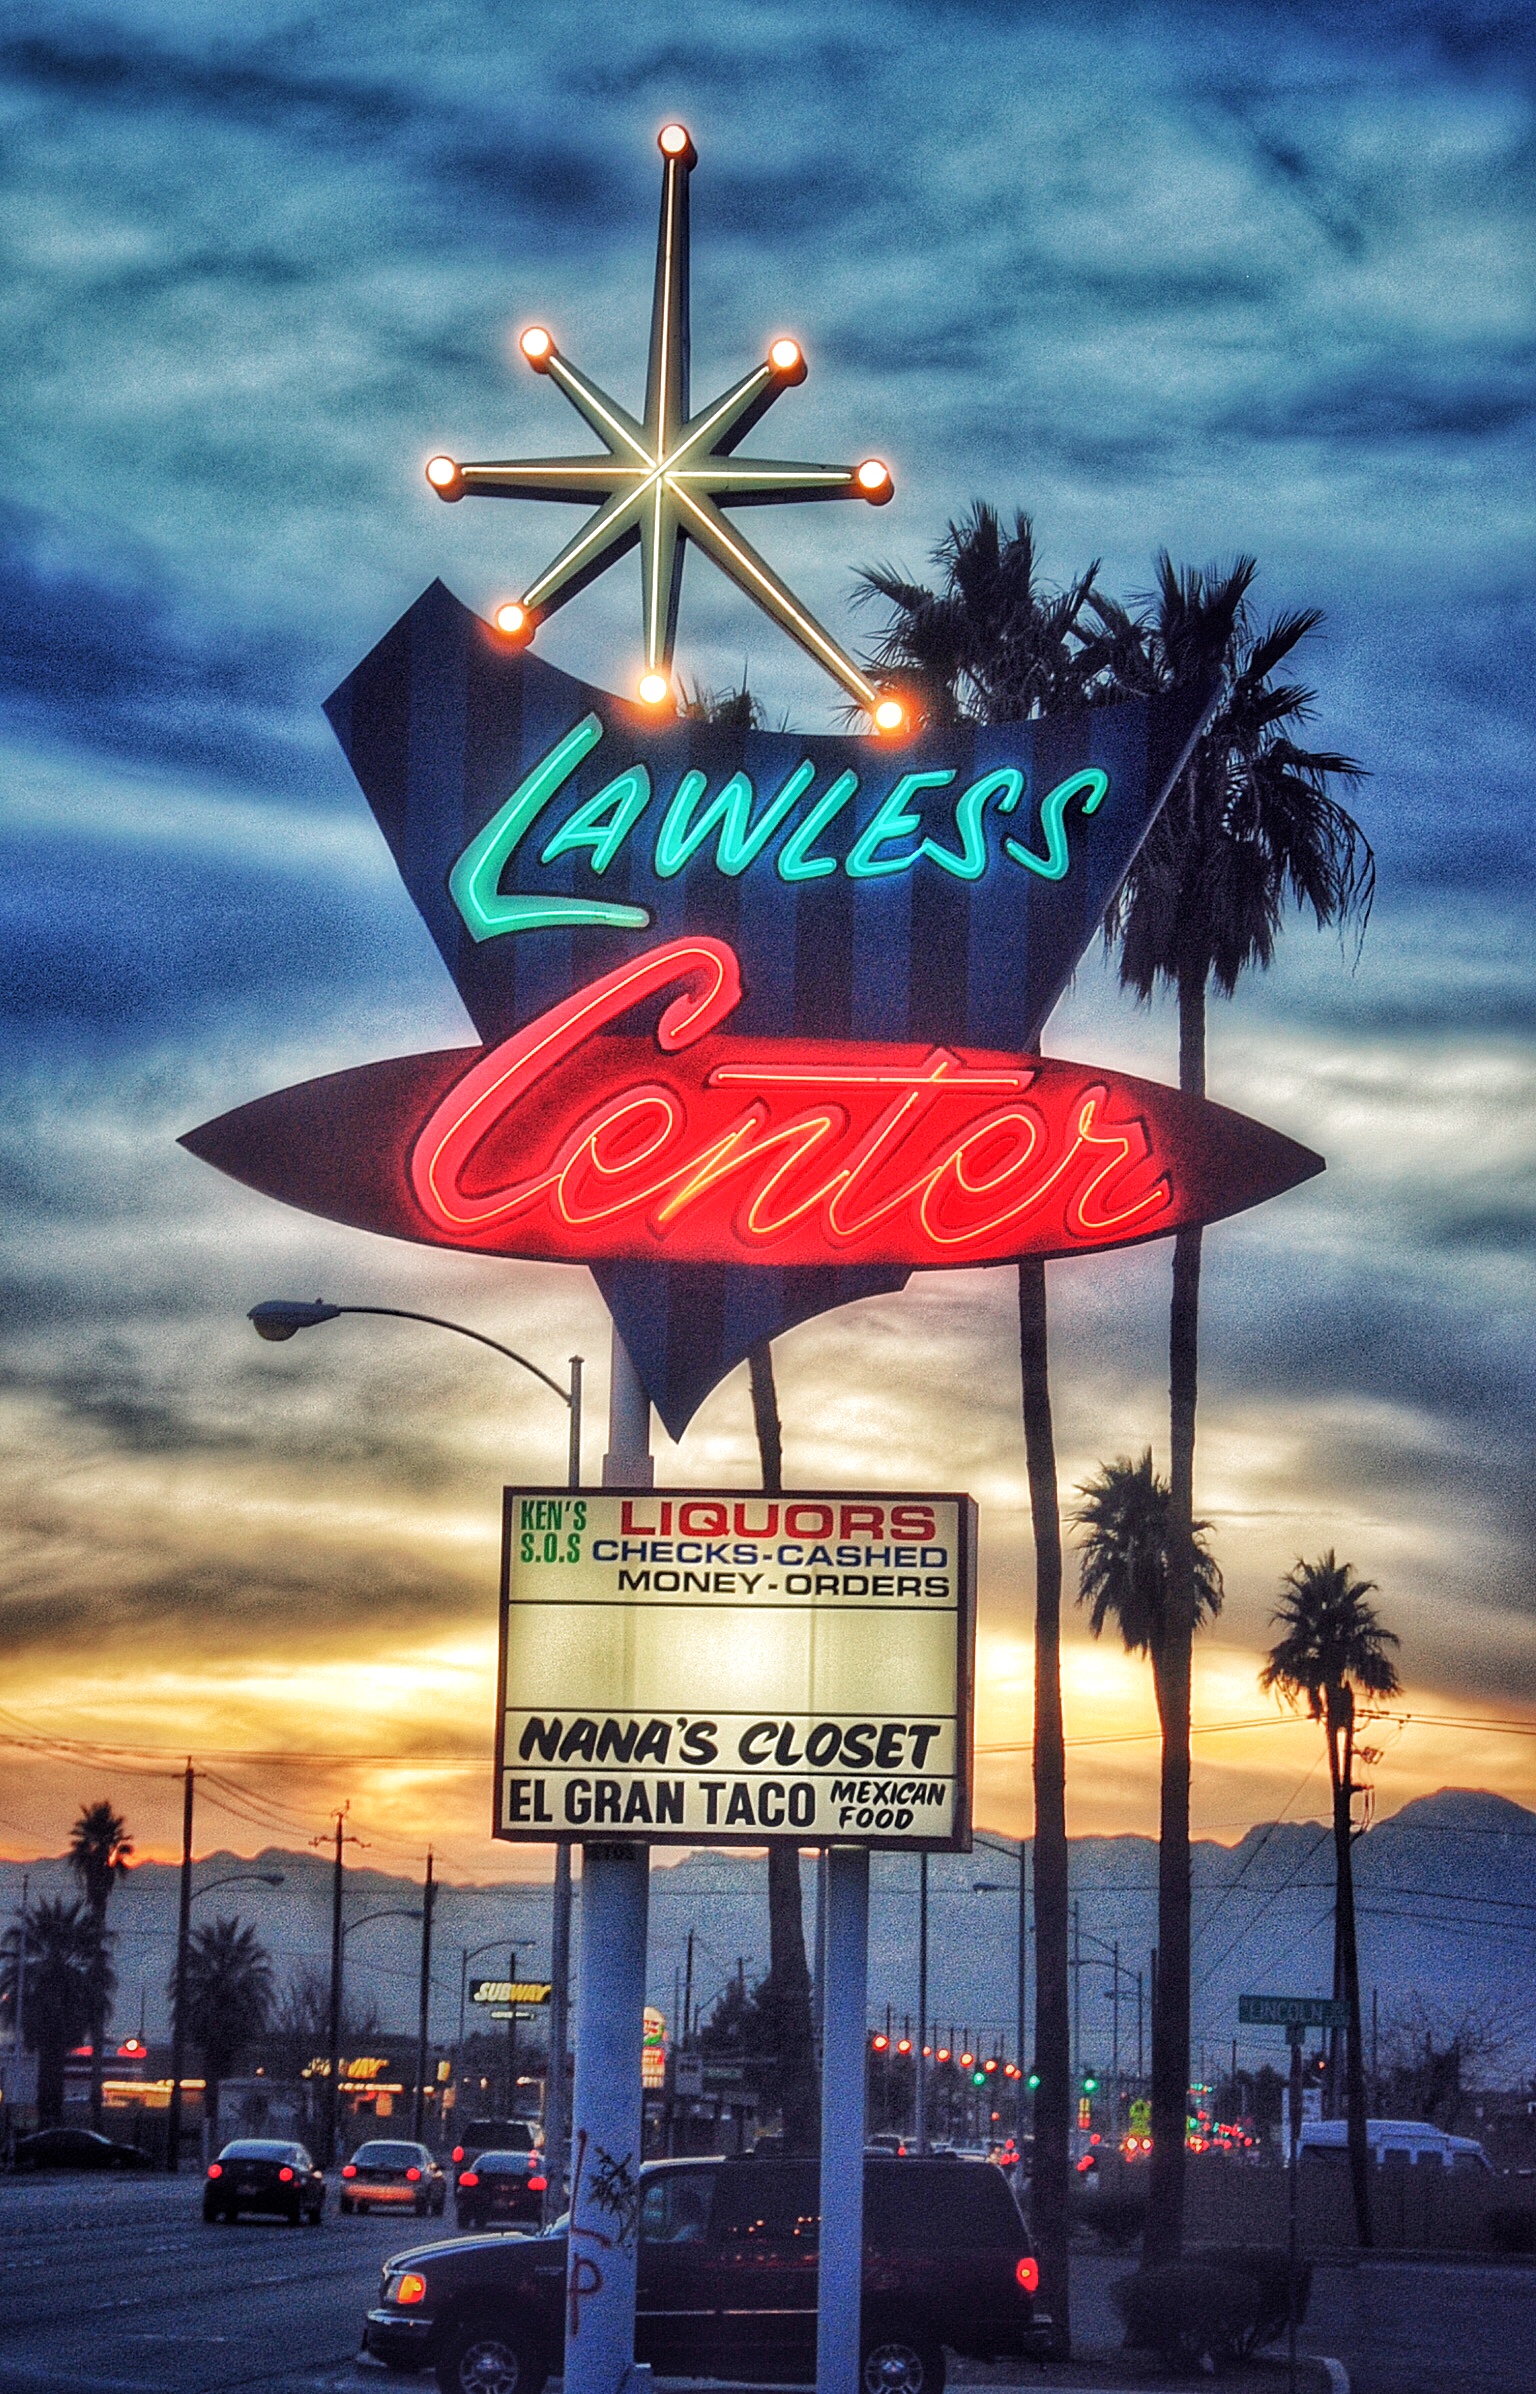 Lawless Center - East Lake Mead Boulevard and Lincoln Road, Las Vegas, Nevada U.S.A. - February 18, 2008